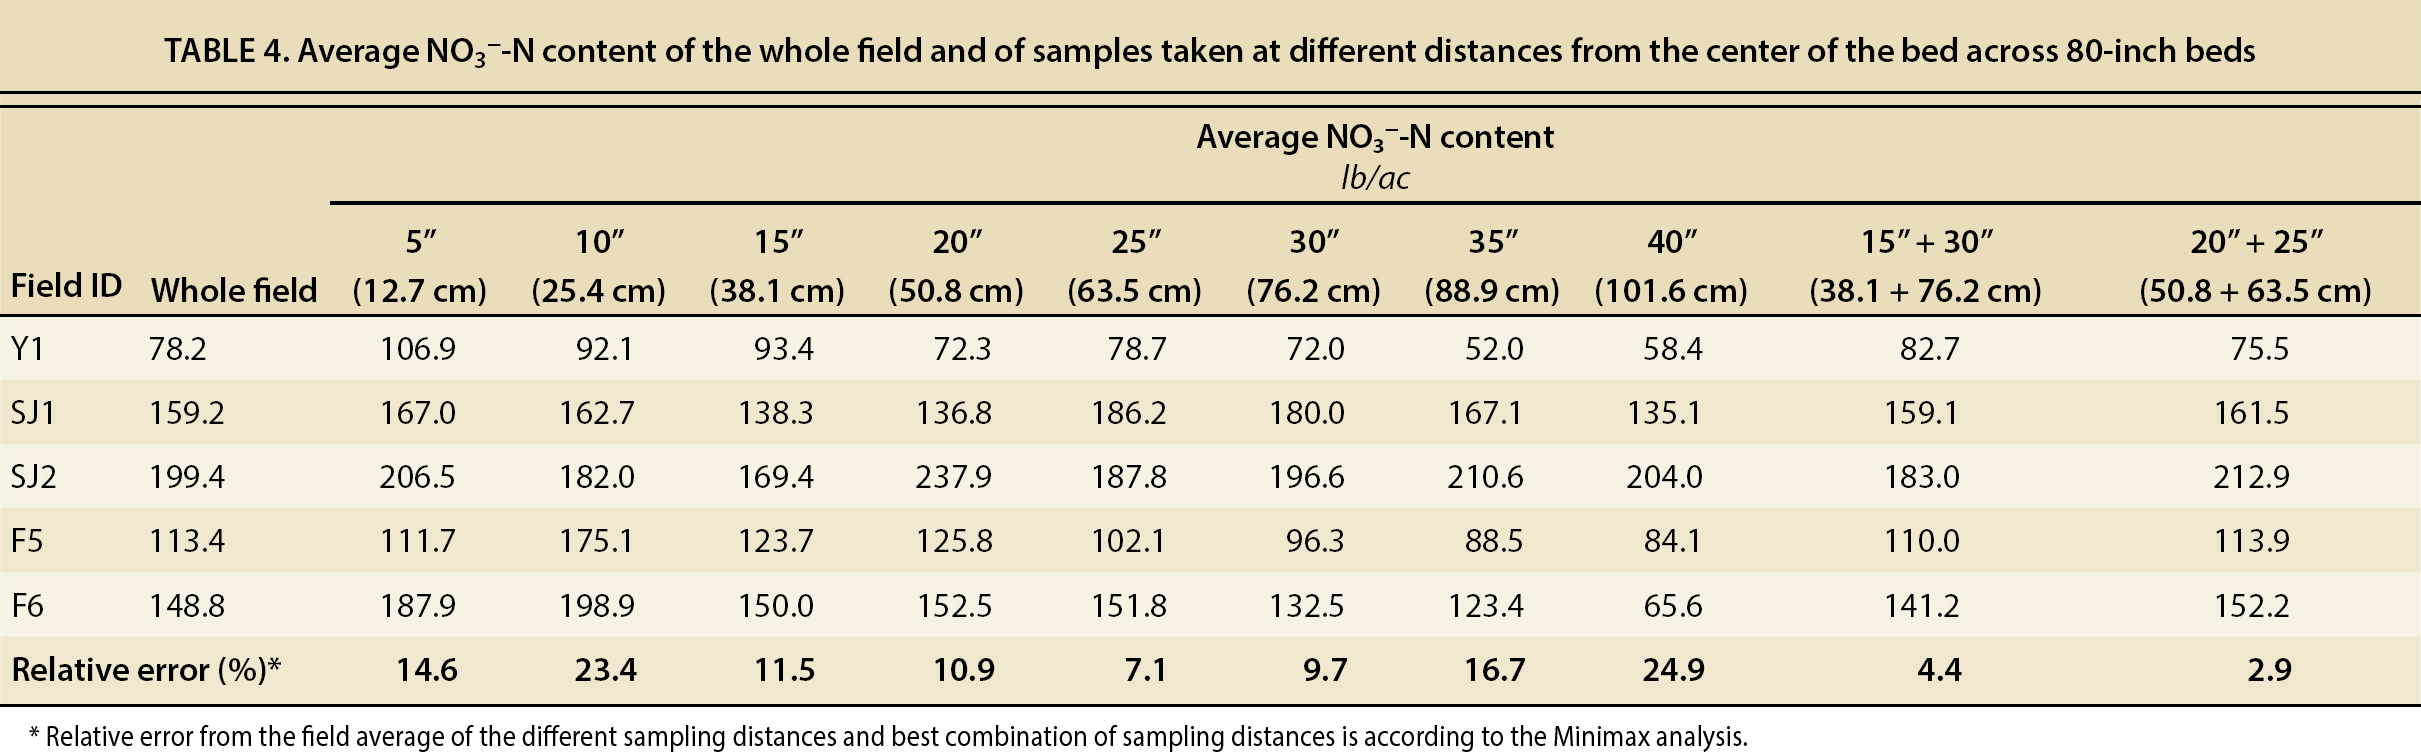 Average NO3−-N content of the whole field and of samples taken at different distances from the center of the bed across 80-inch beds